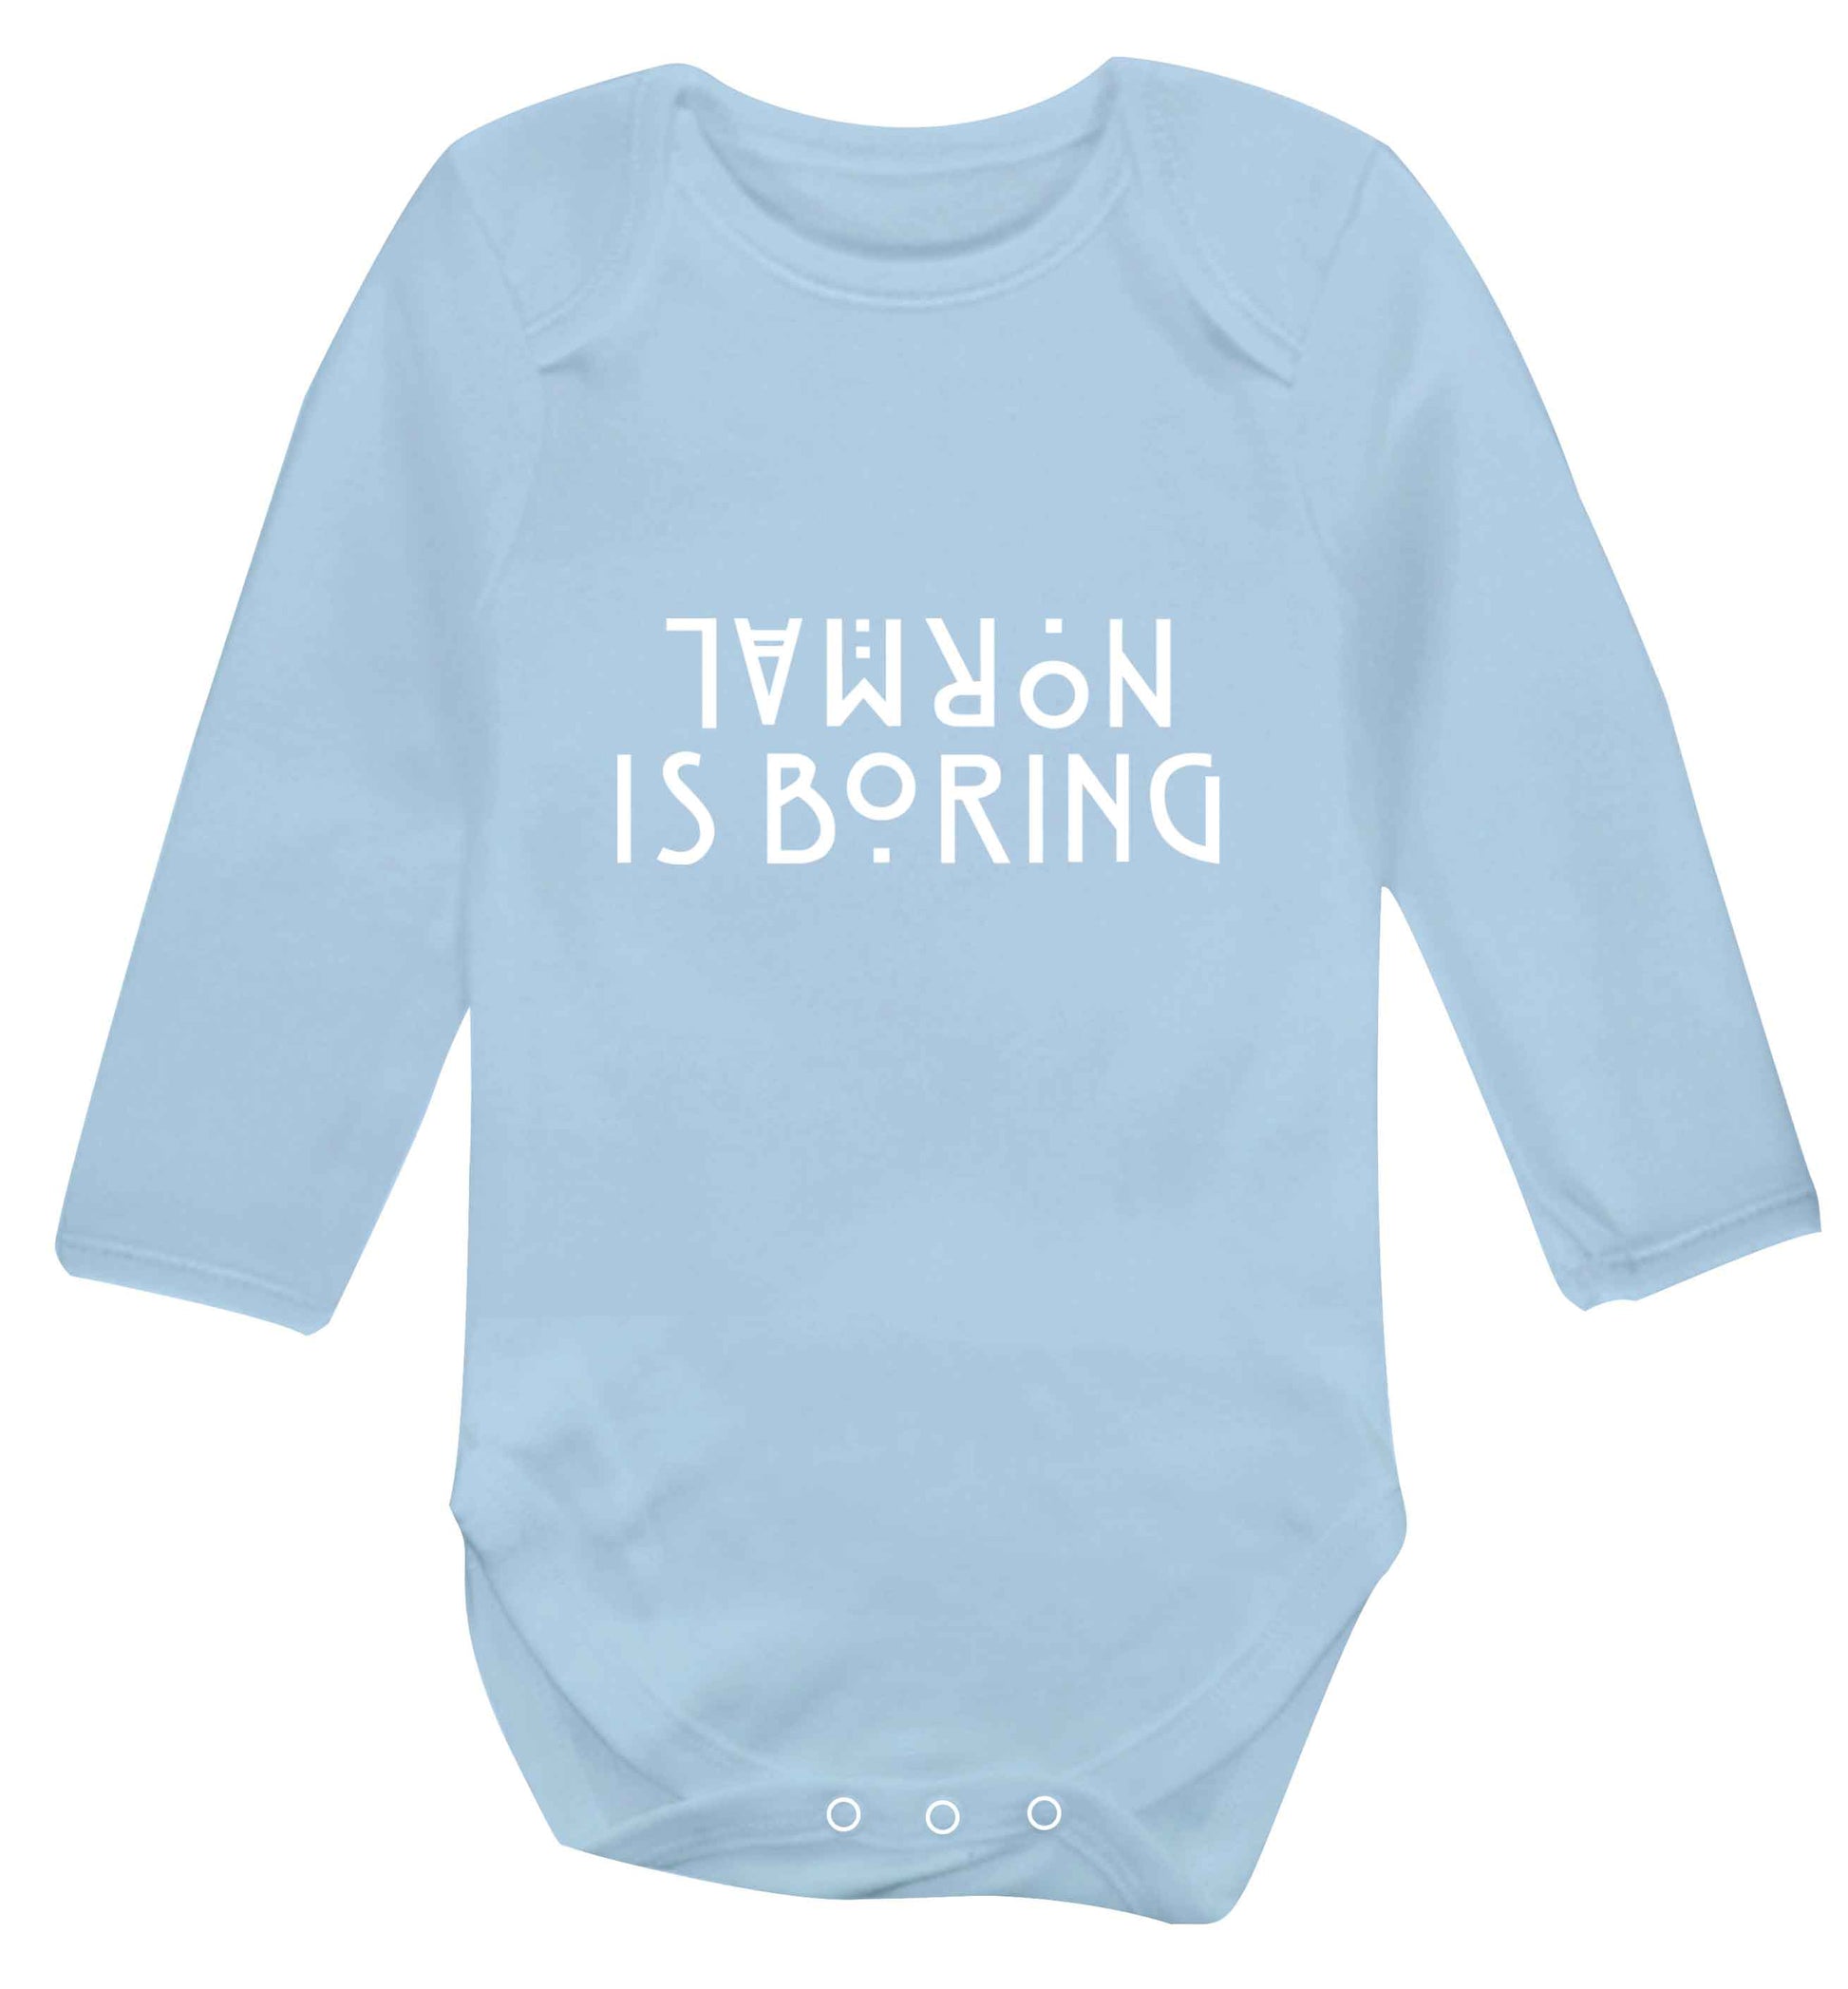 Normal is boring baby vest long sleeved pale blue 6-12 months